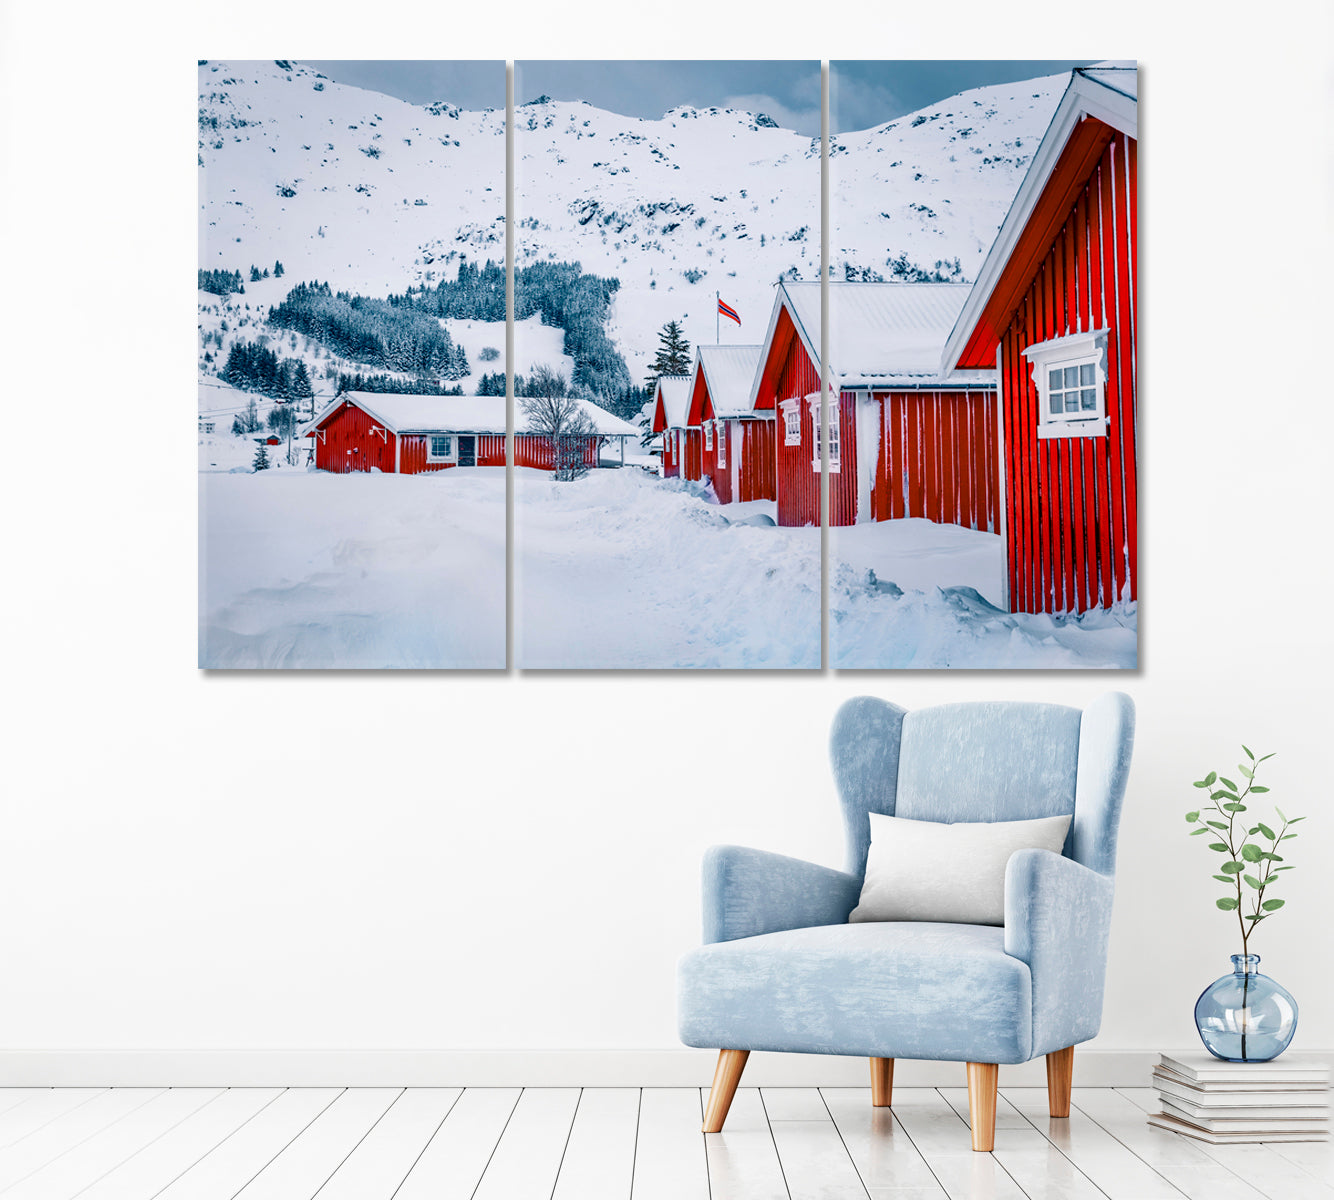 Lofoten Islands with Traditional Norwegian Red Wooden Houses Canvas Print ArtLexy 3 Panels 36"x24" inches 